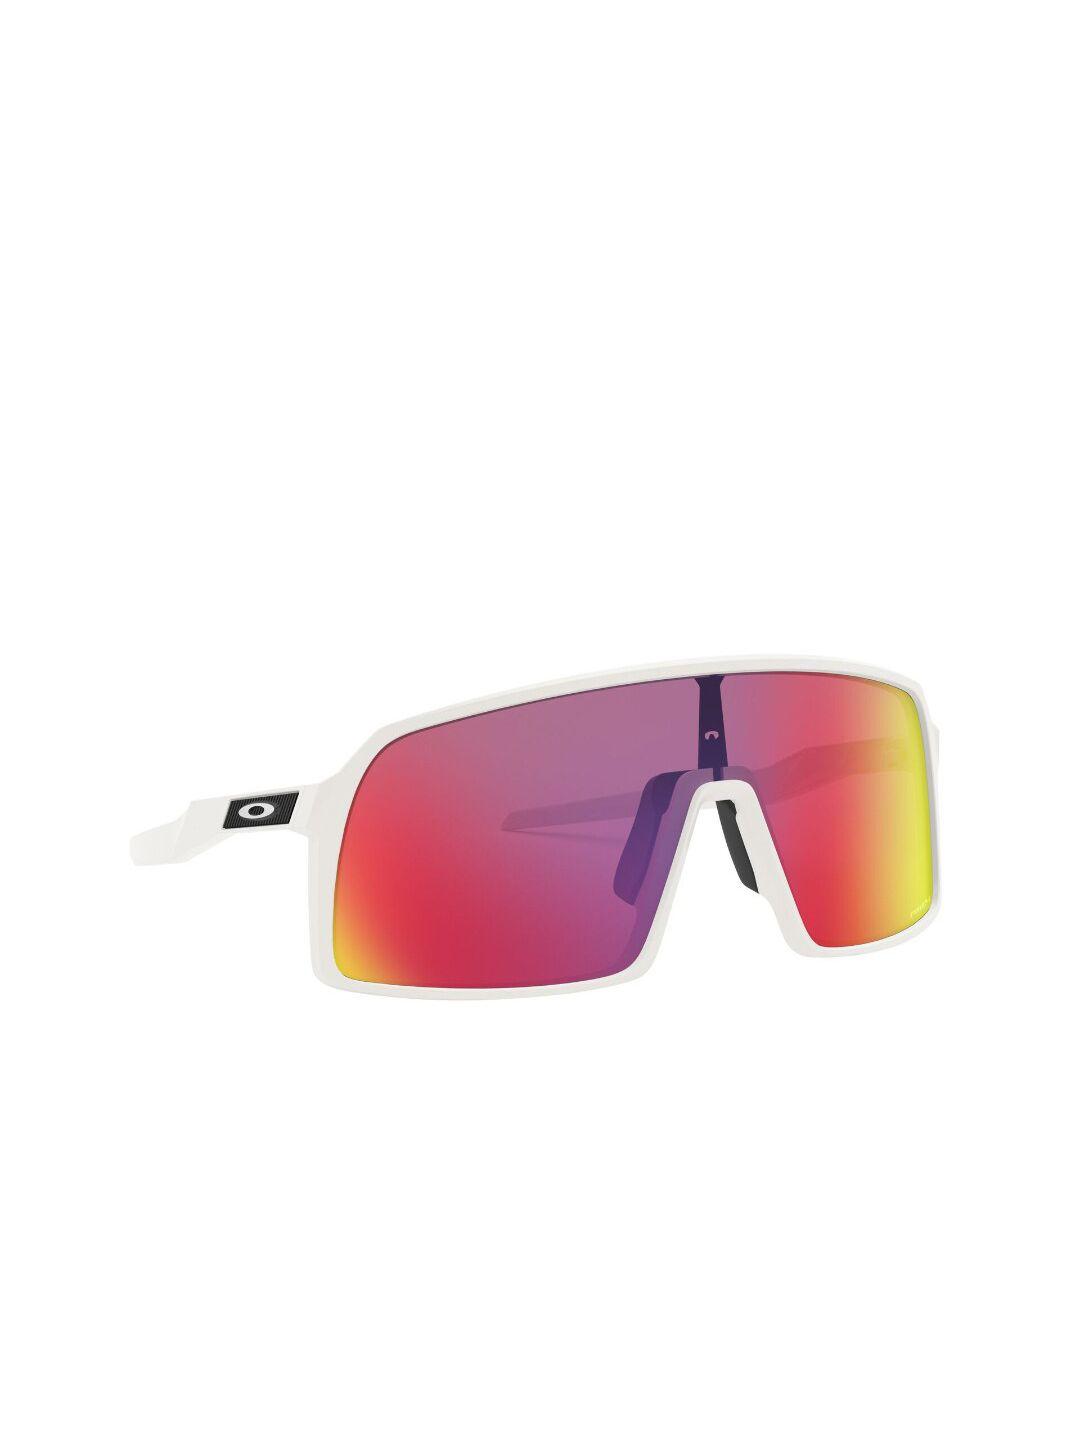 oakley men rectangle sunglasses with uv protected lens 888392404800